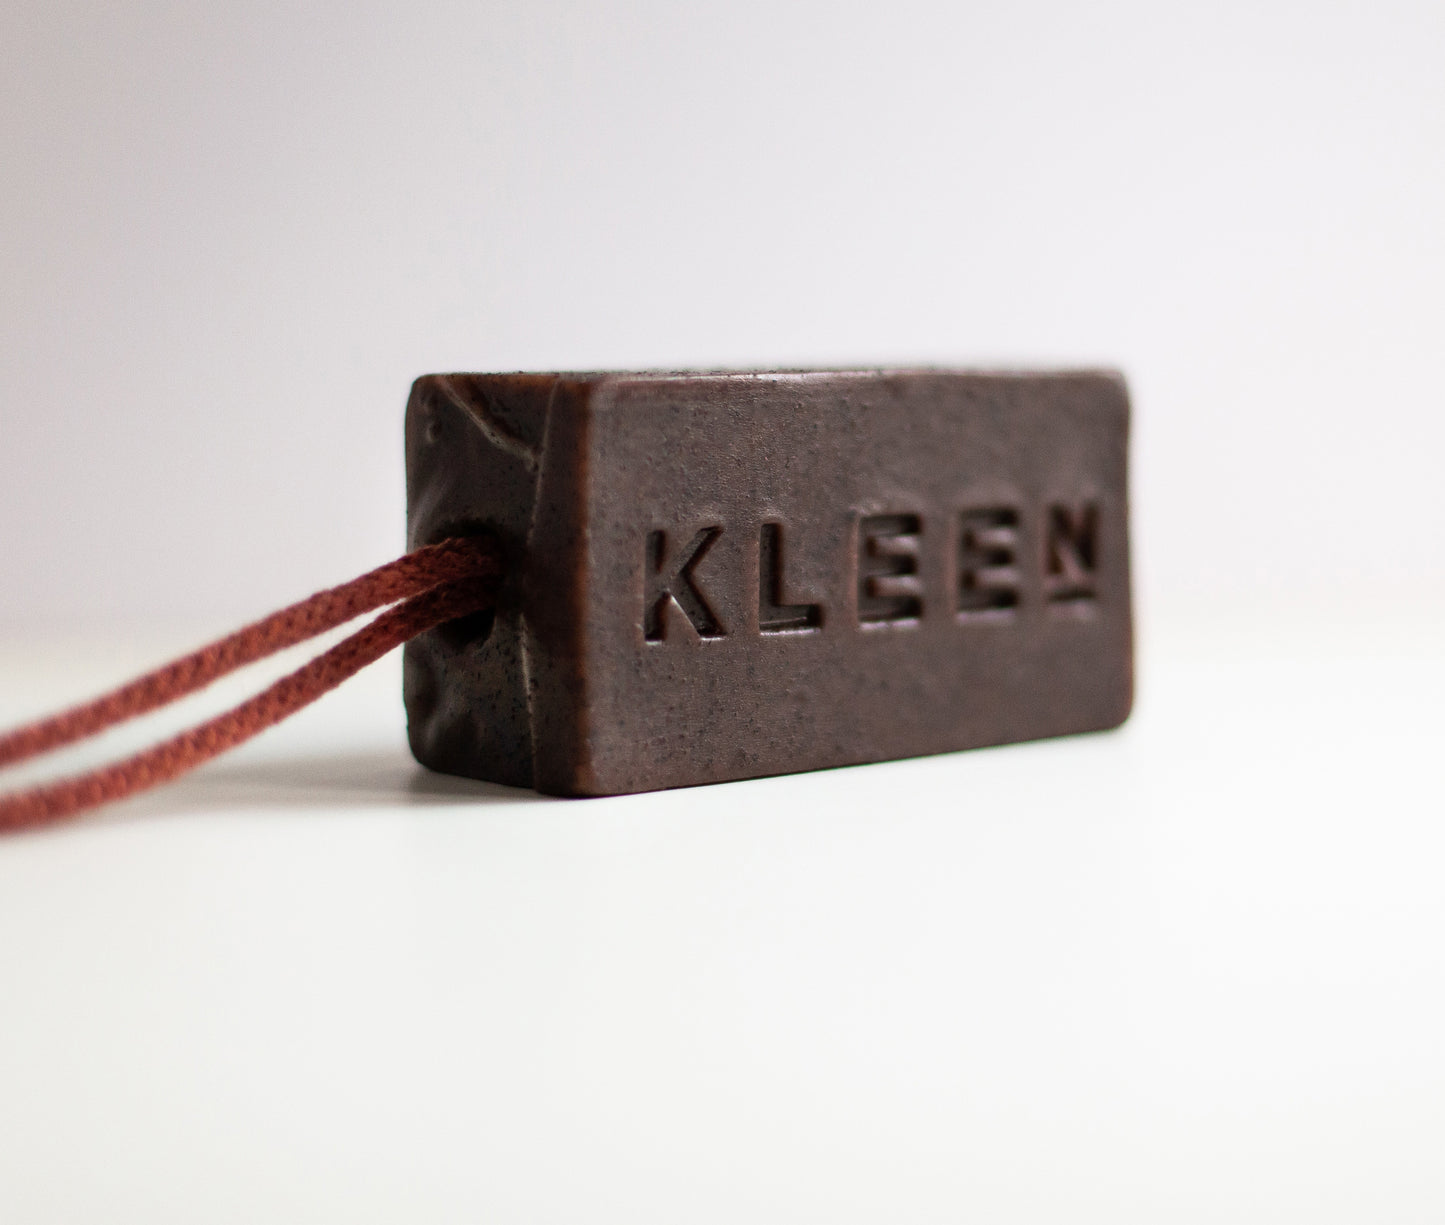 Tall, Dark & Handsome soap on a rope - Plum & Belle